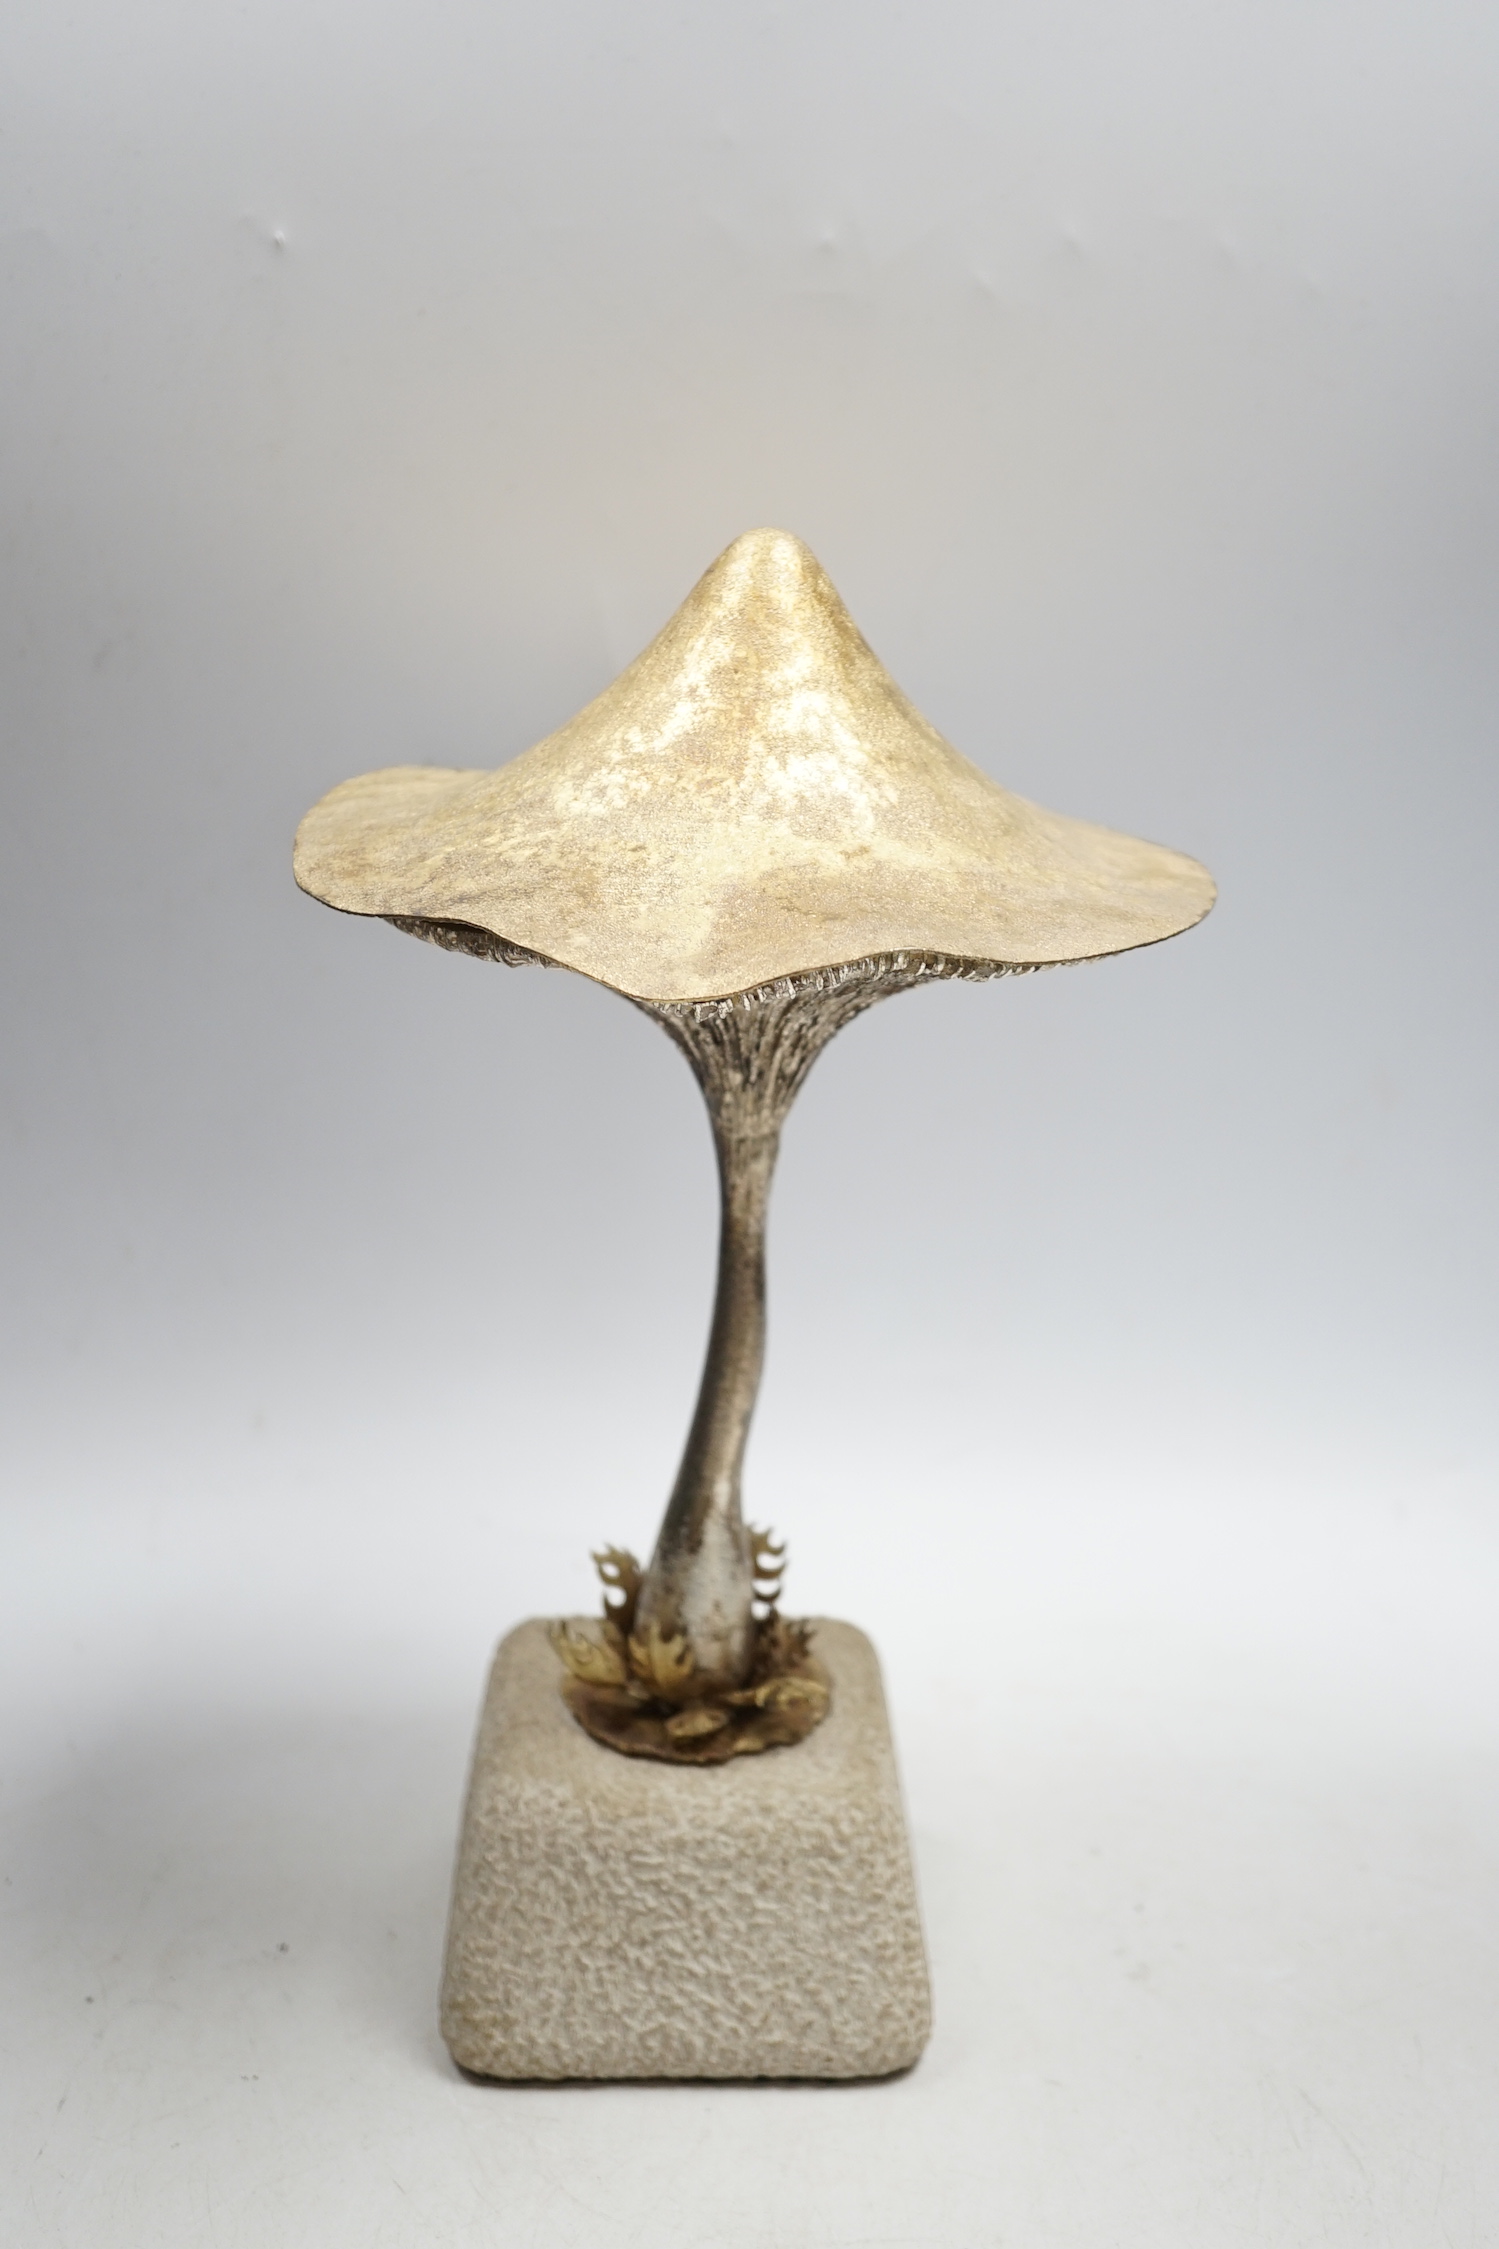 An Elizabeth II limited edition novelty surprise mushroom, by Christopher Nigel Lawrence, London, 1976, opening to reveal a pixie fishing, no.2/8, on a simulated rock base, overall height 29.5cm, with certificate.